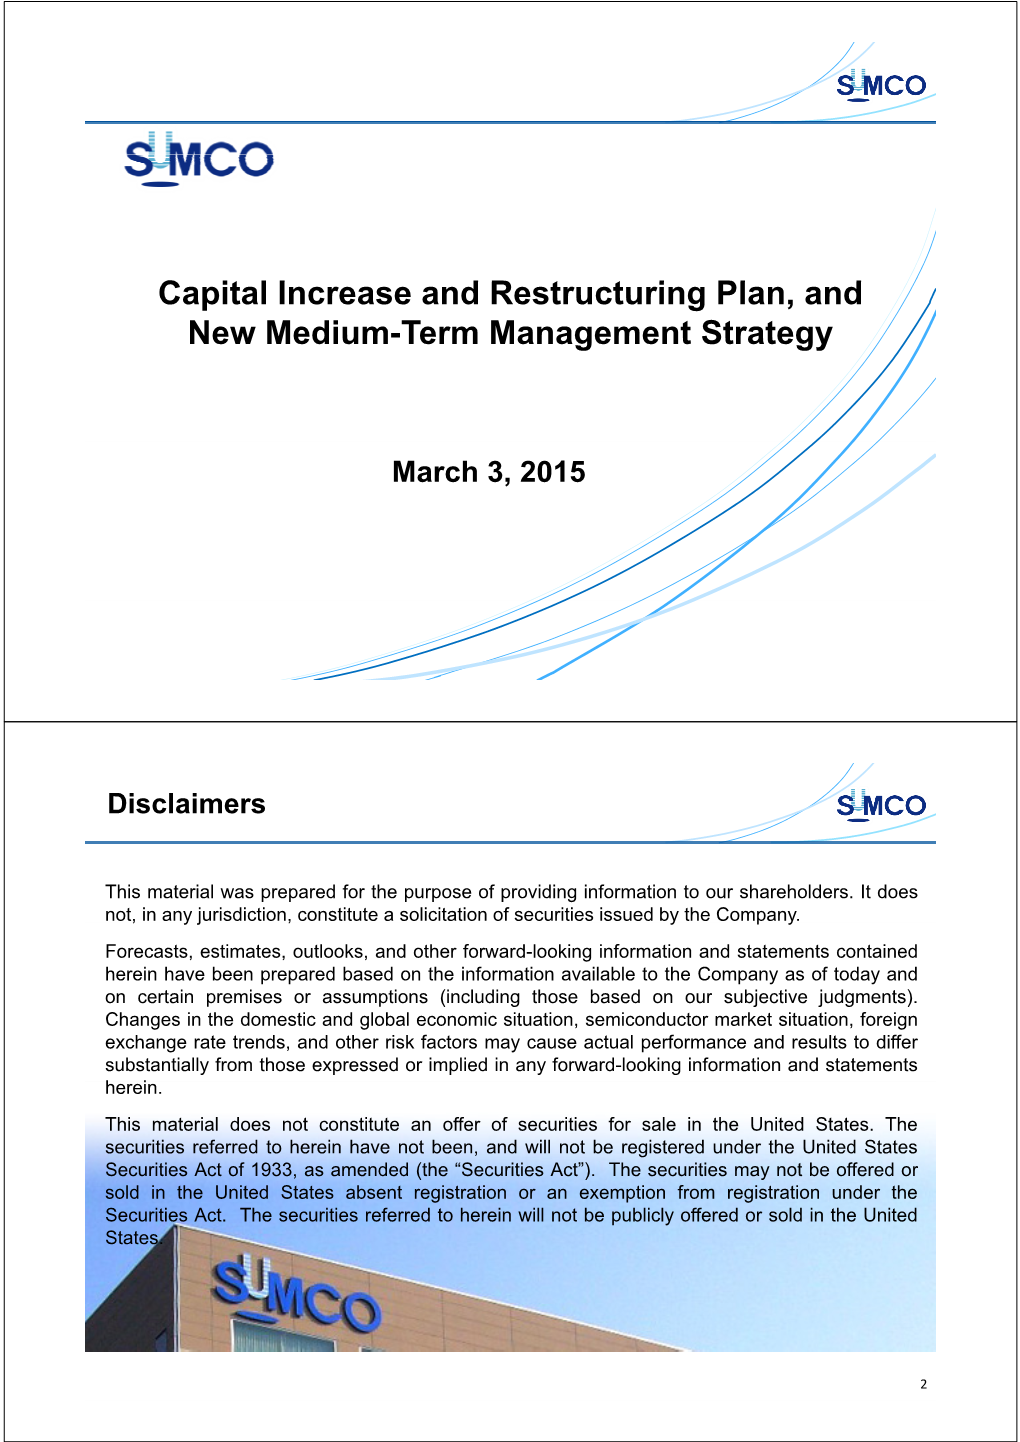 SUMCO (3436) Capital Increase and Restructuring Plan, and New